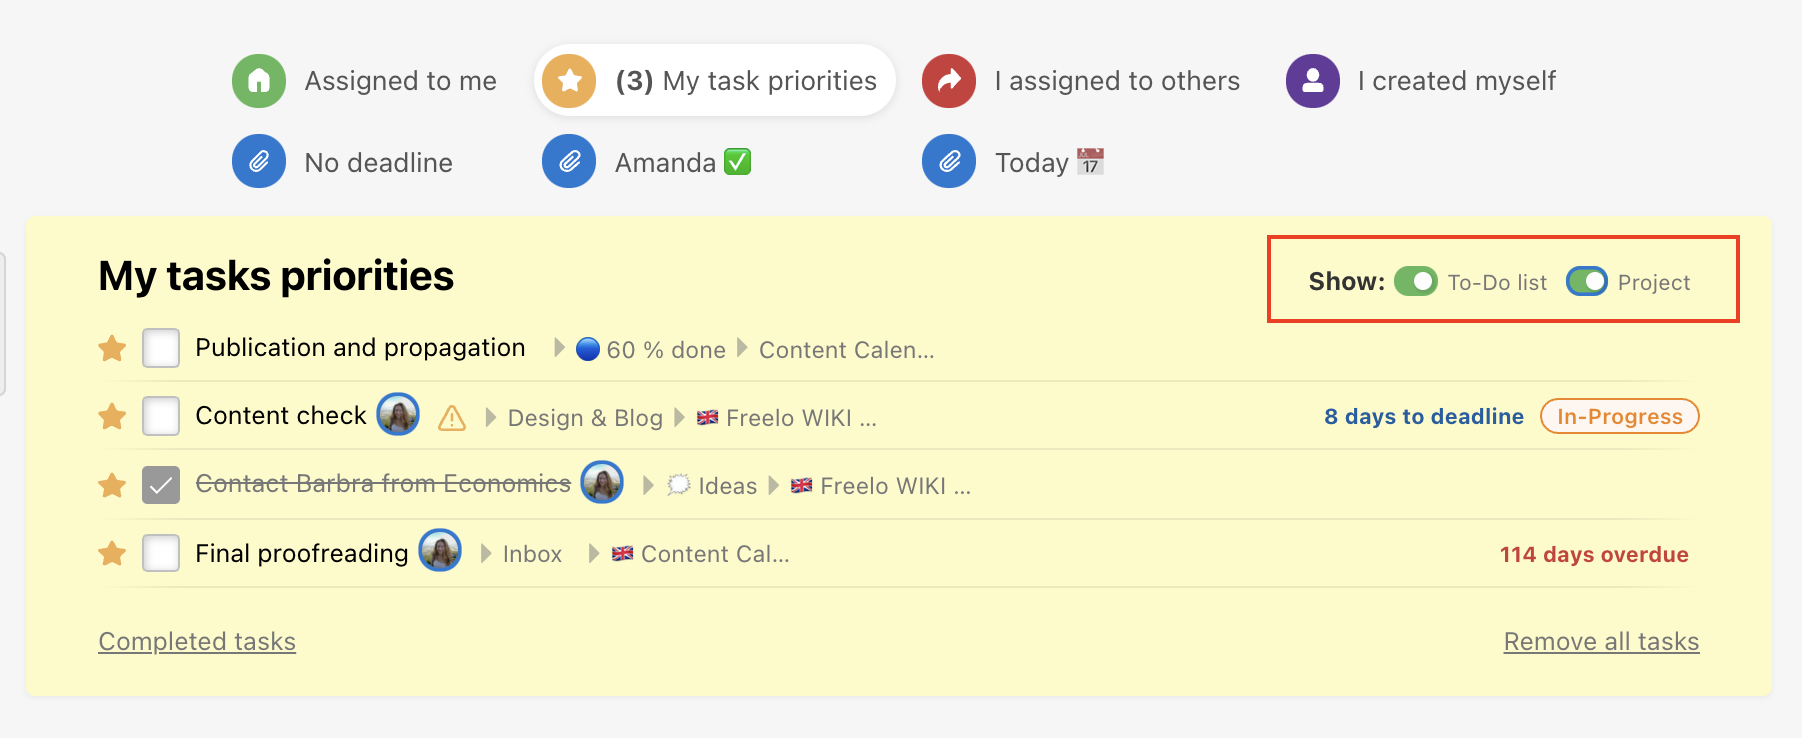 Add a To-Do list or Project detail for better orientation.